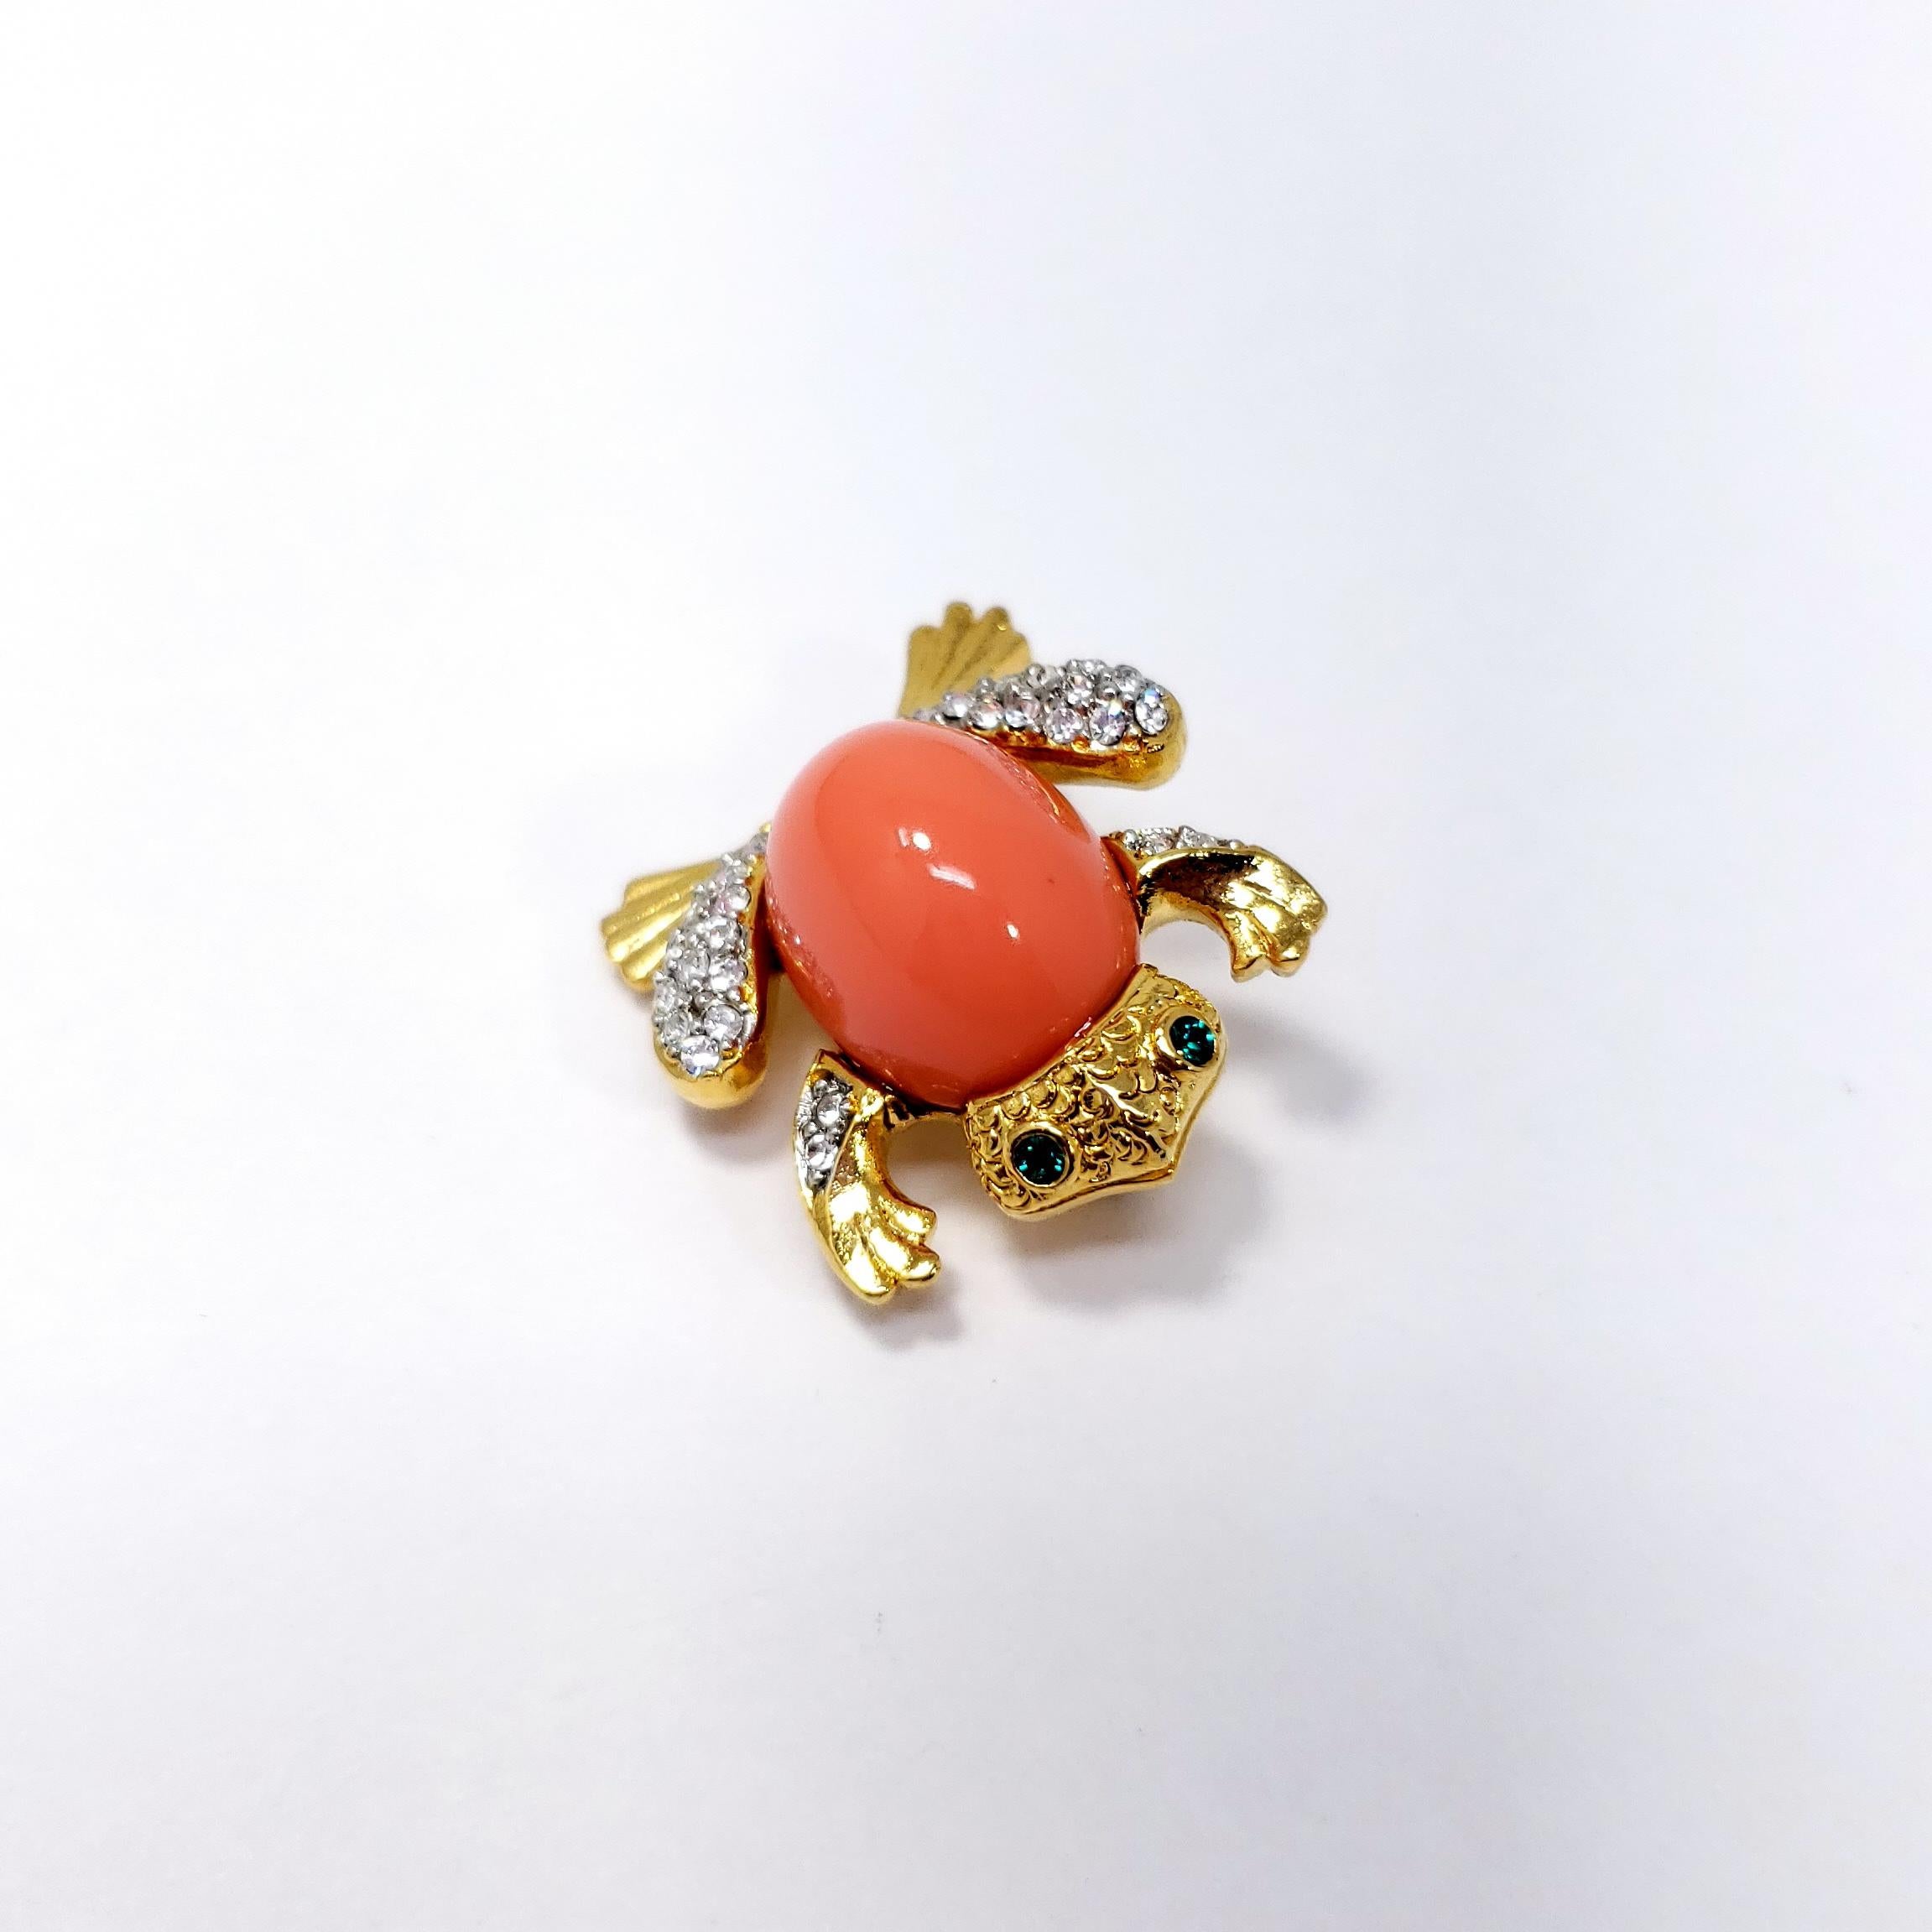 Whimsical Kenneth Jay Lane frog brooch, featuring a faux coral cabochon accented with clear and green crystals. Gold plated.

Hallmarks: Kenneth Lane